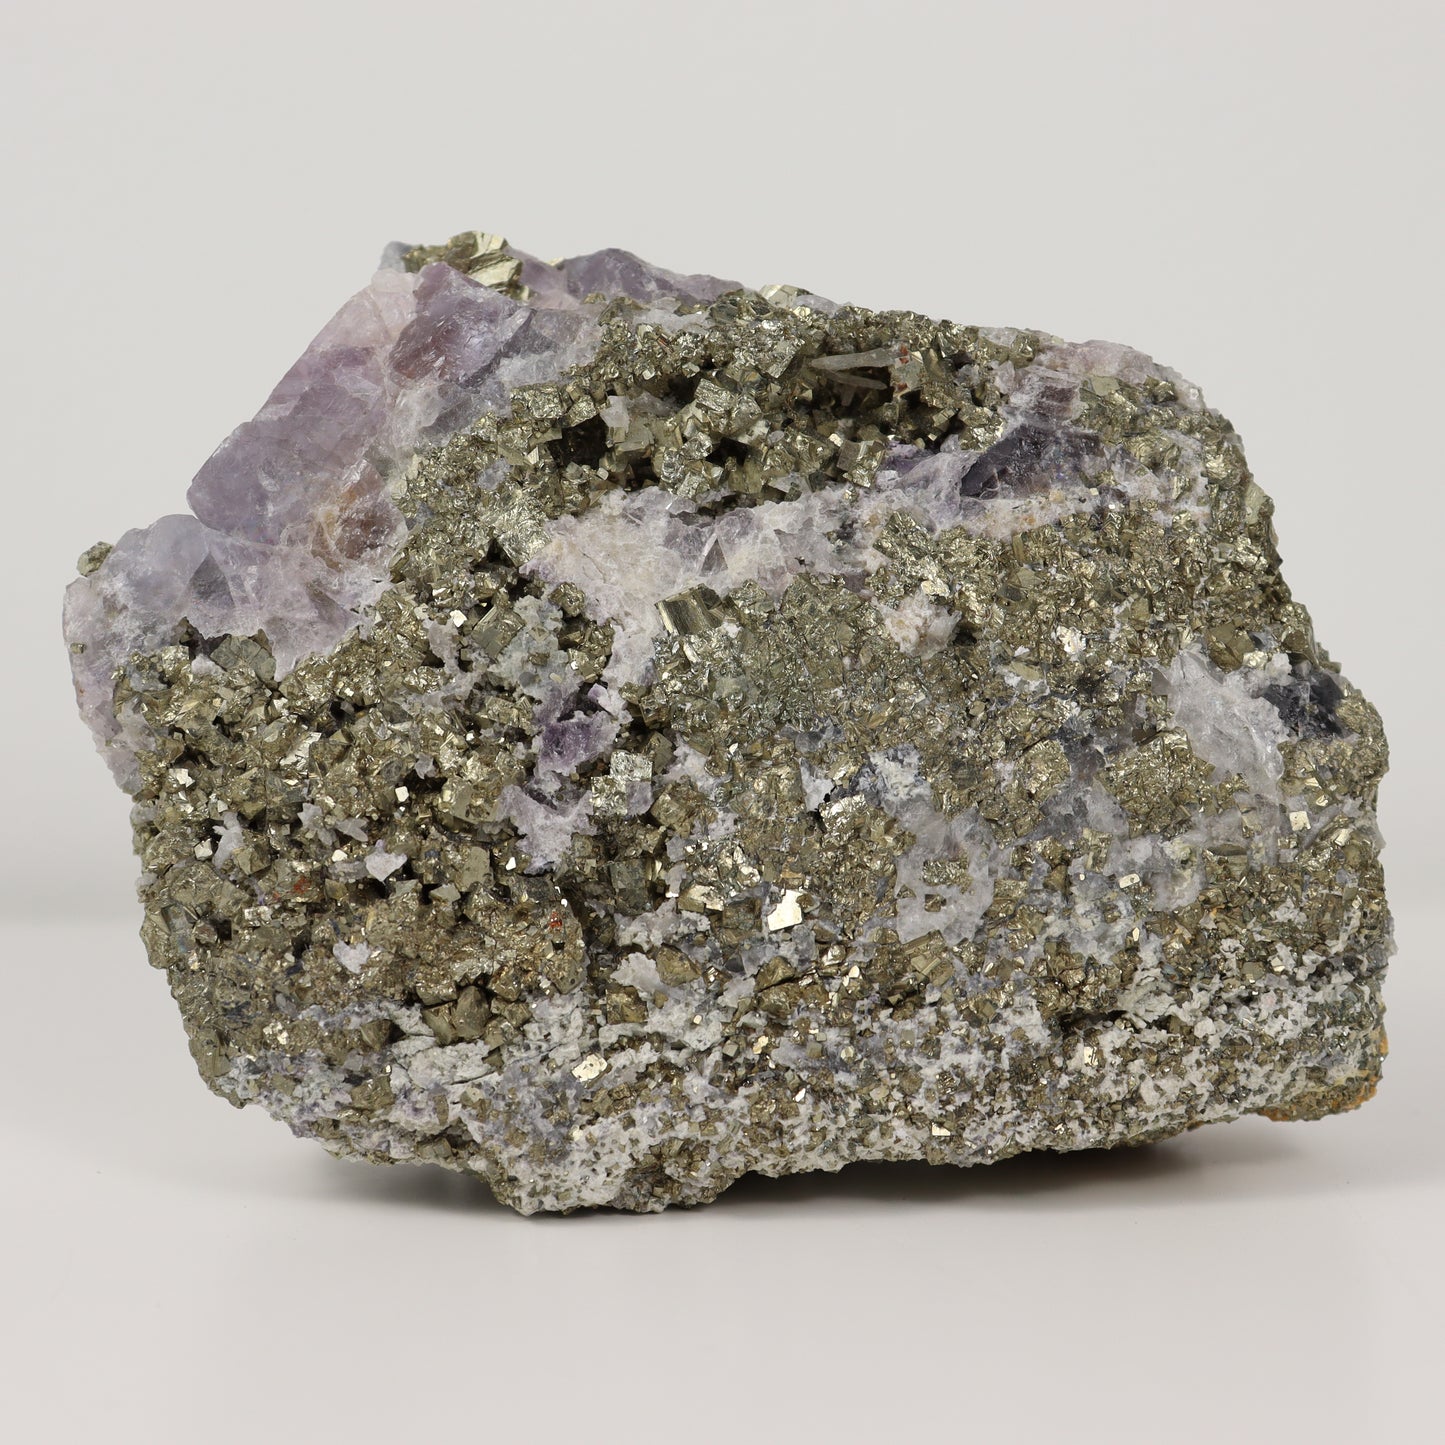 Pyrite Specimen with Clear Quartz and Amethyst Inclusions